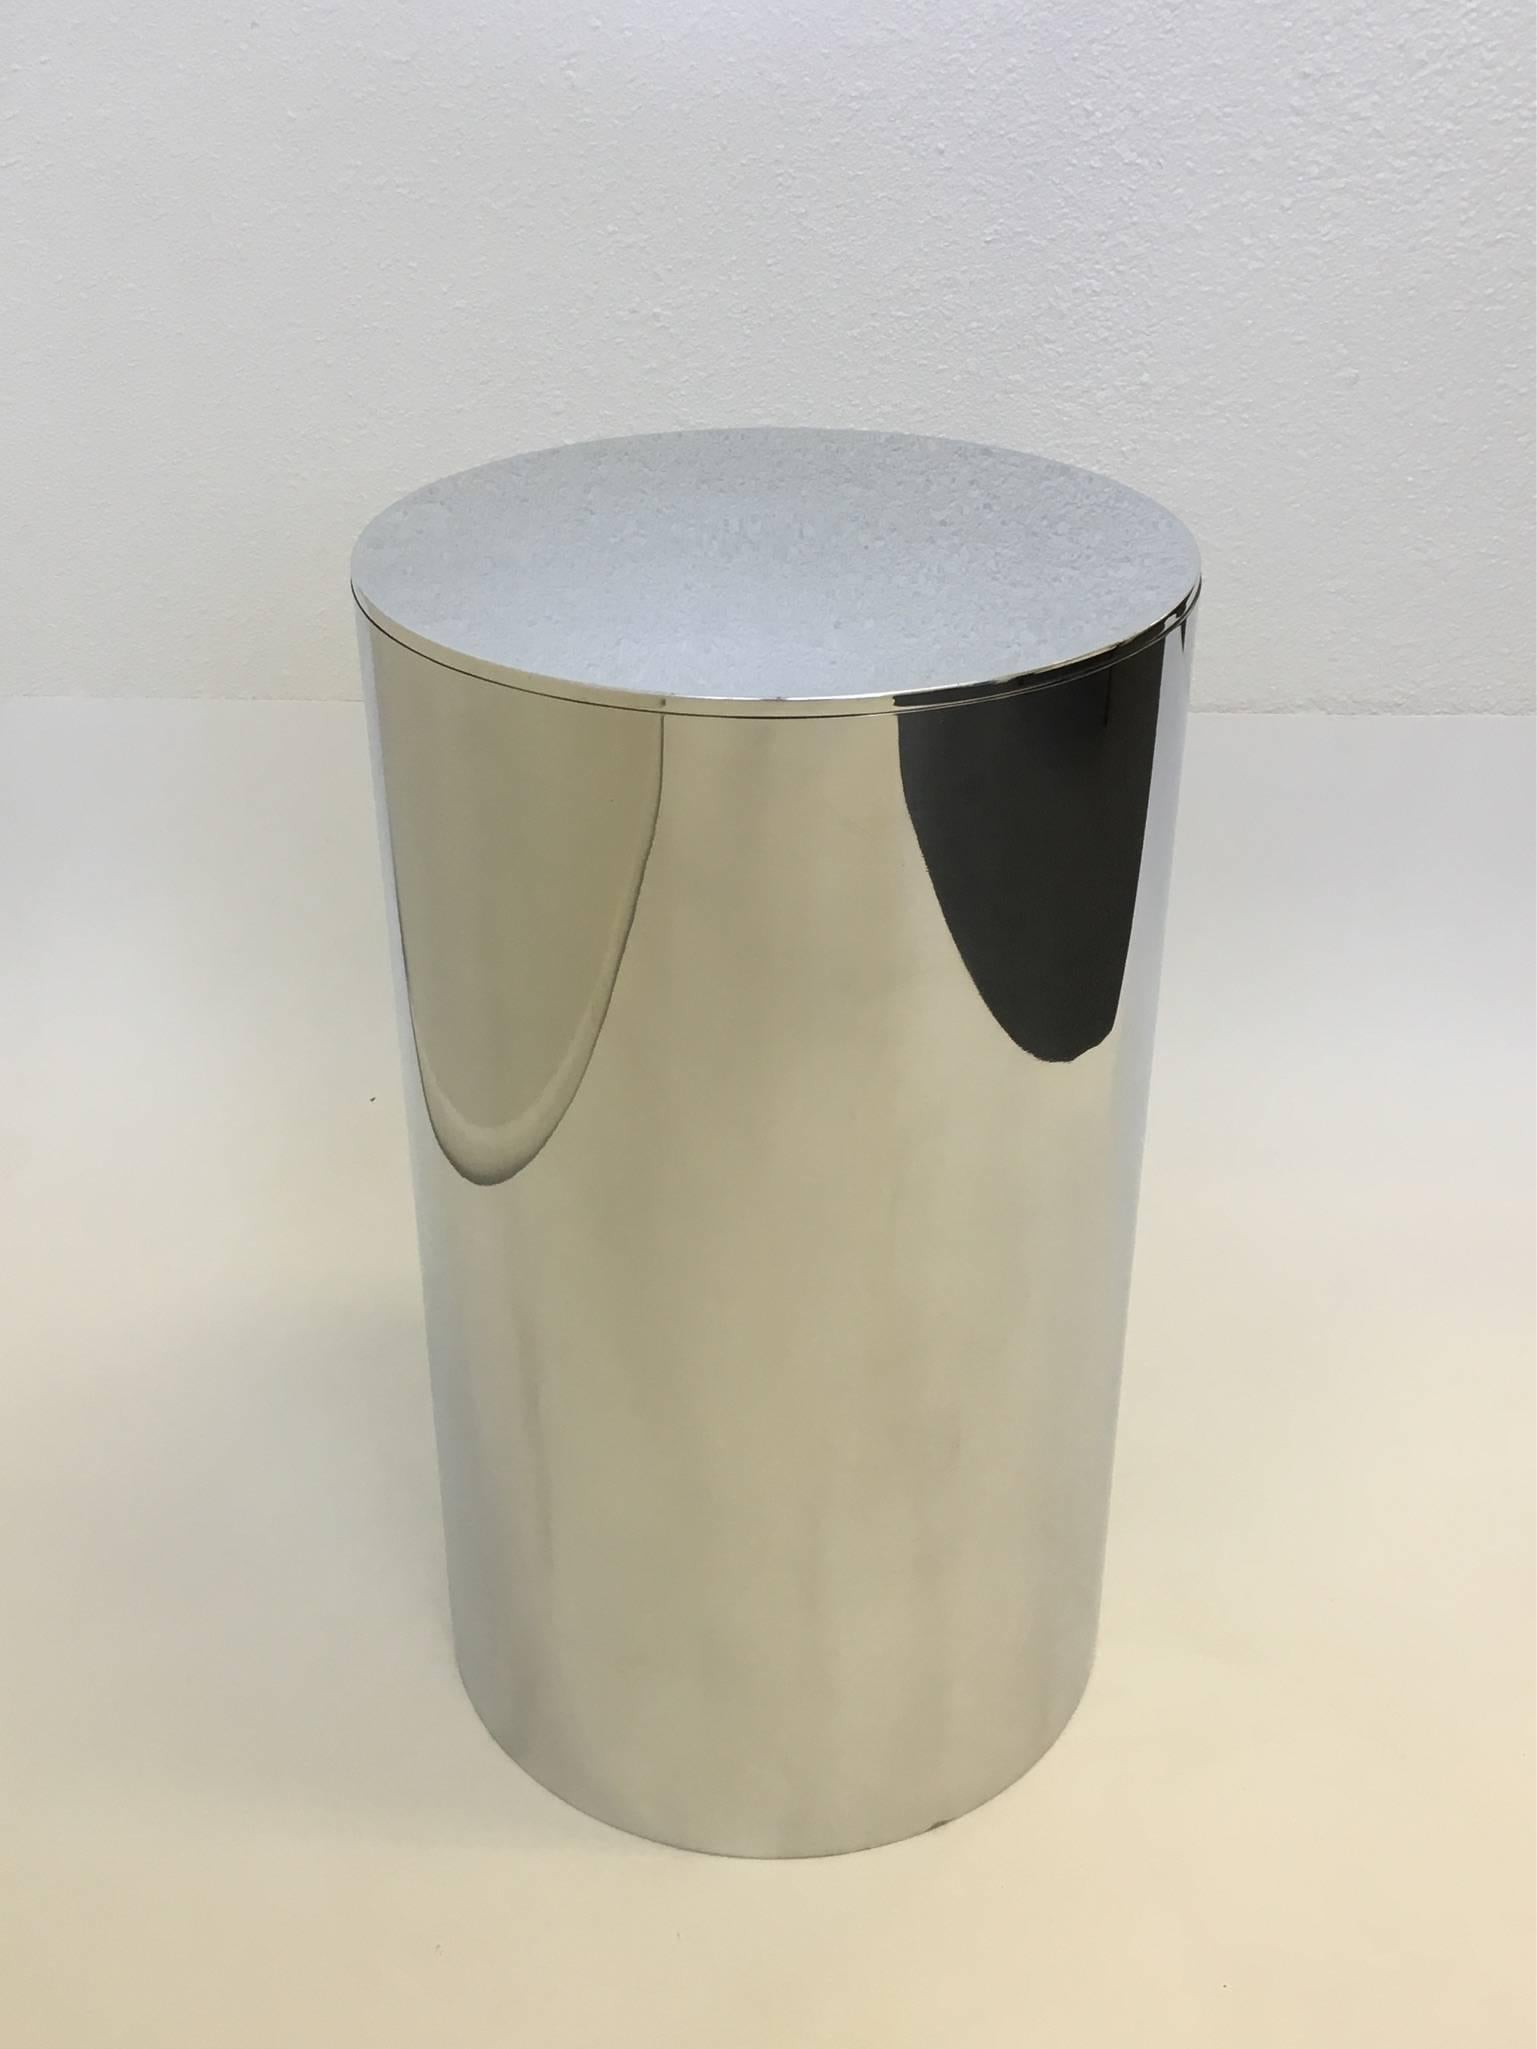 A simple but elegant polished aluminium drum occasional table designed by Paul Mayen for Habitat UK. Newly professionally polished.
Dimensions: 12